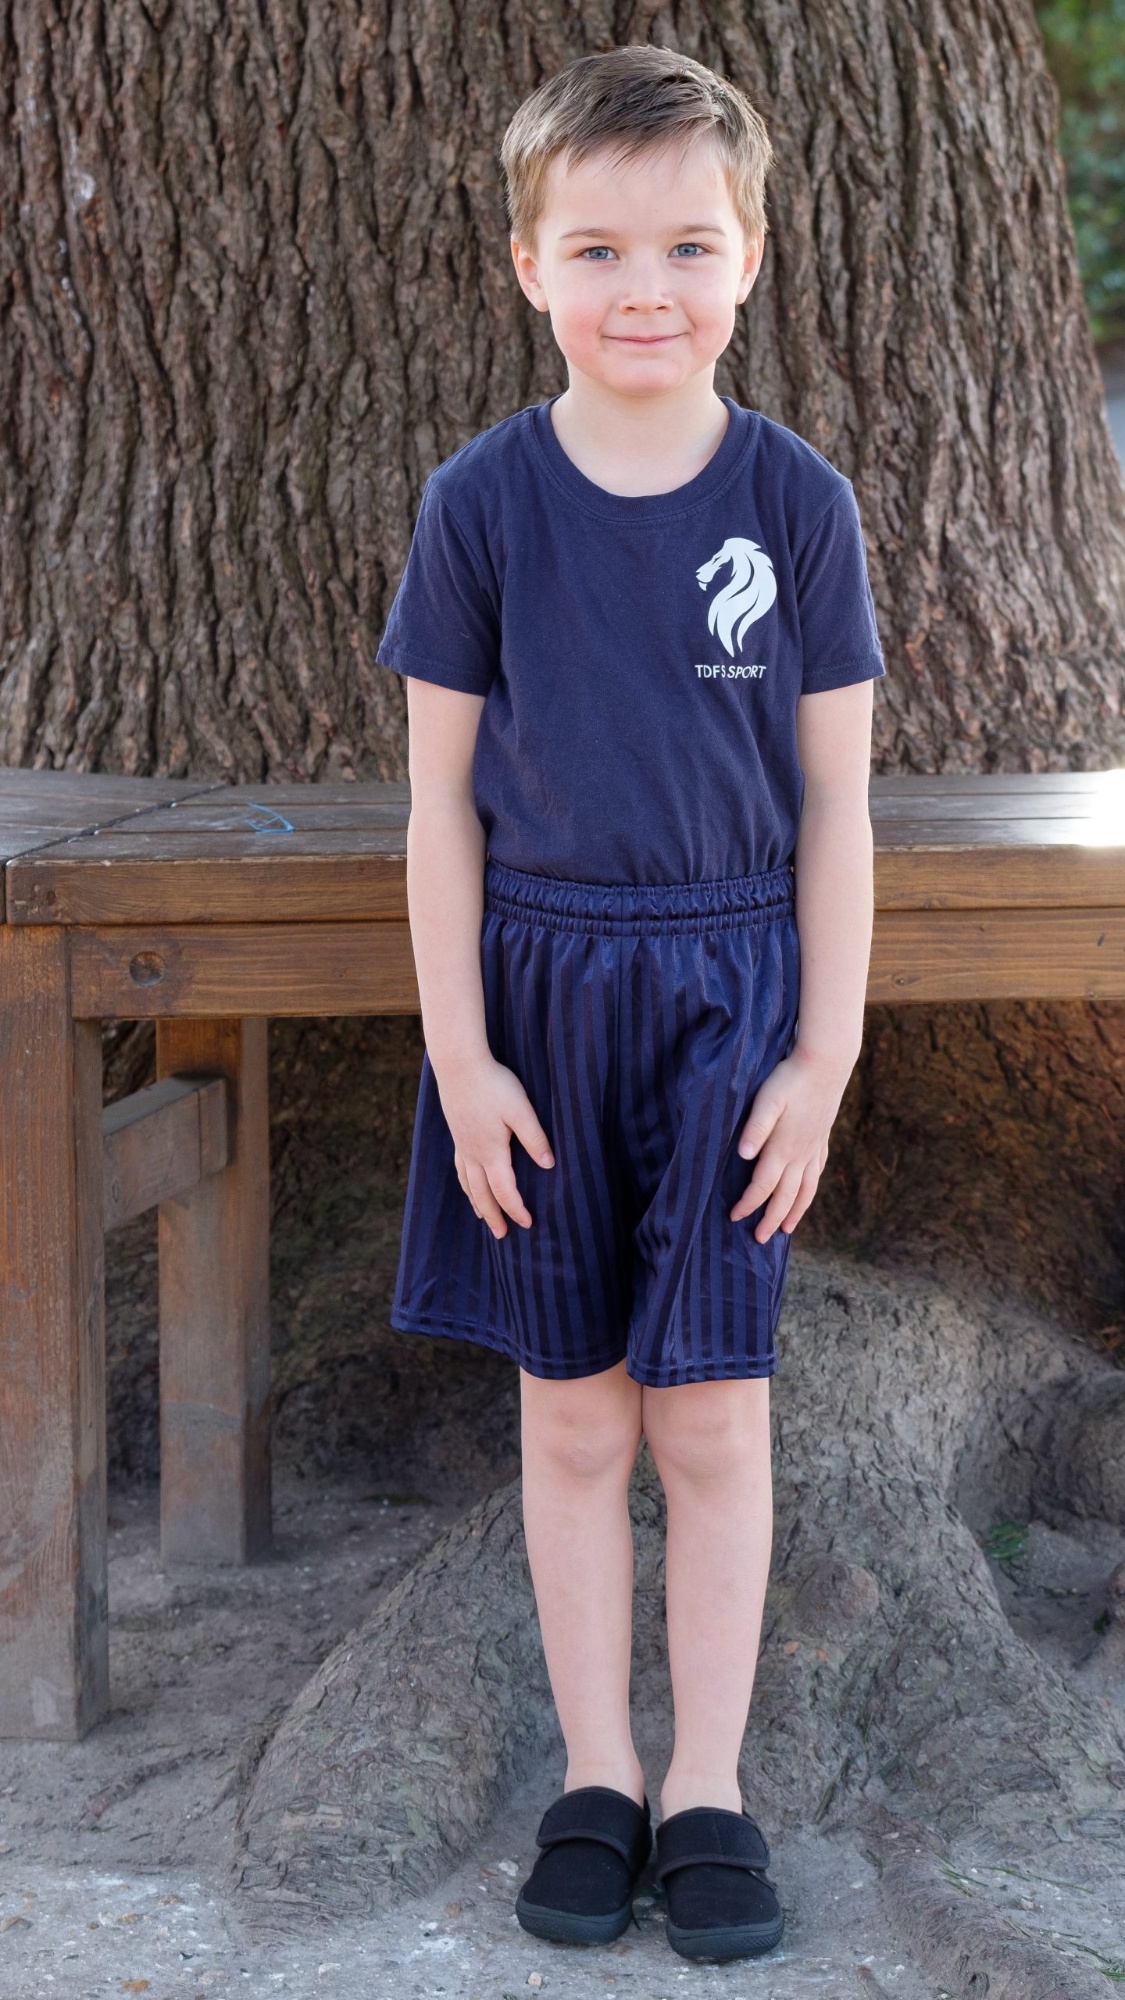 A male pupil stands outside wearing his outdoor PE kit, consisting of shorts and a school PE t-shirt